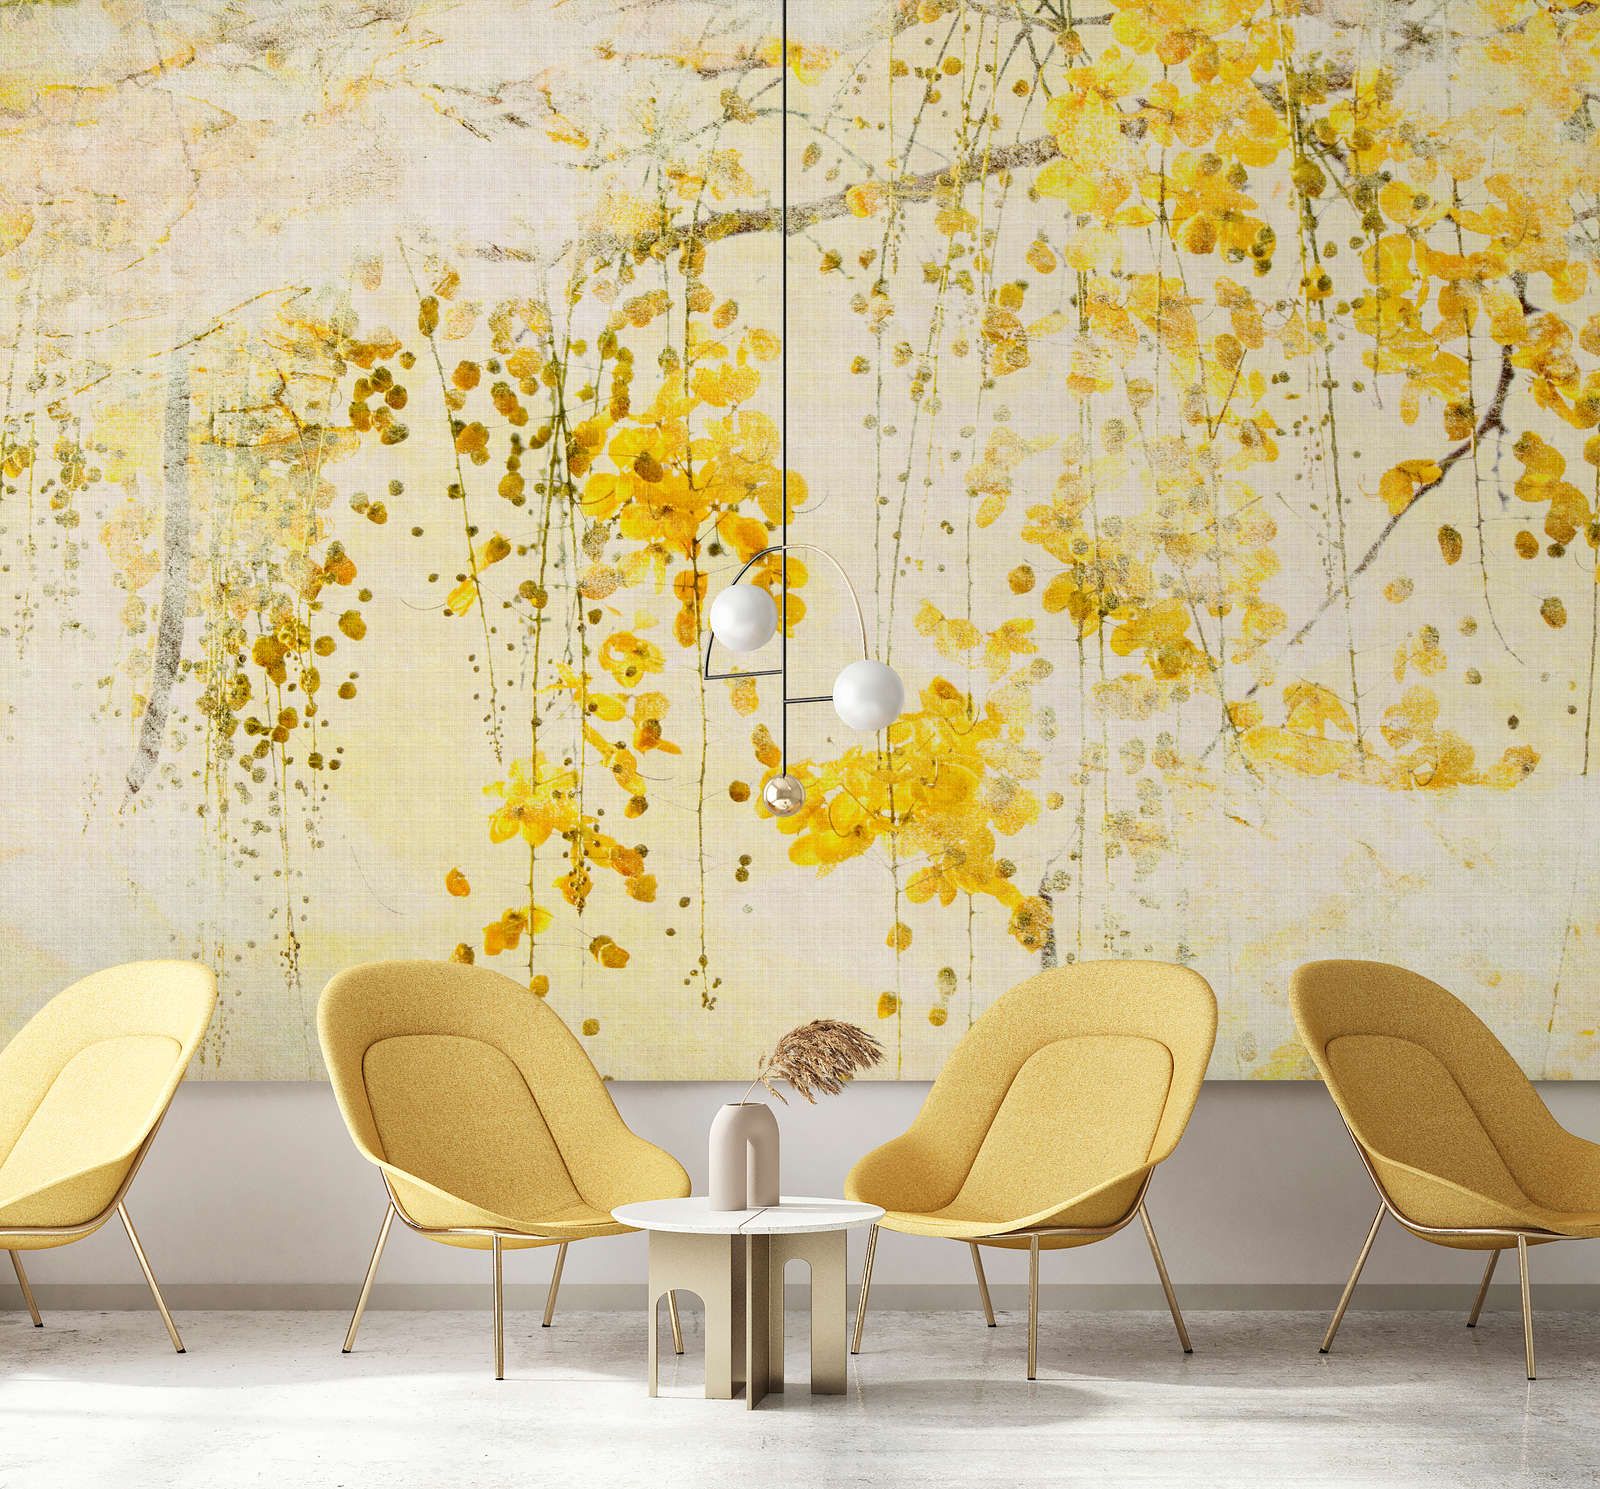             Photo wallpaper »taiyo« - Flower garland with linen structure in the background - Yellow | Smooth, slightly shiny premium non-woven fabric
        